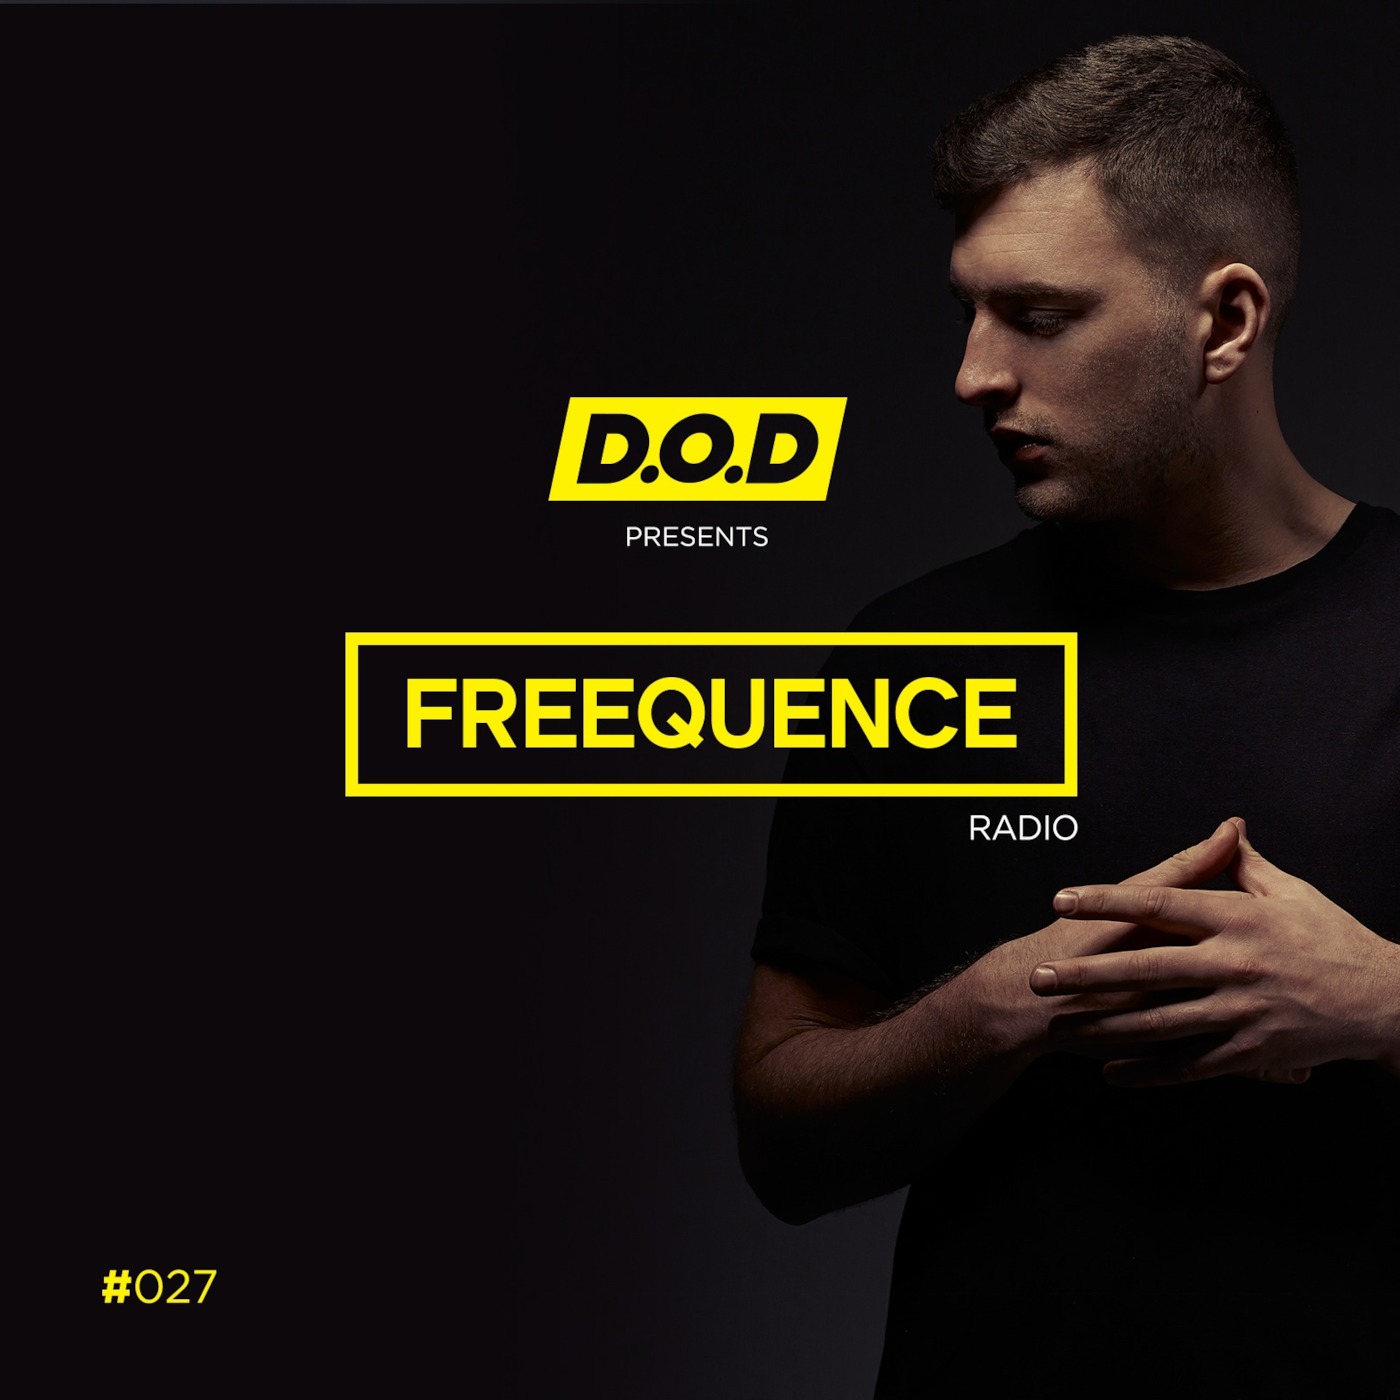 #FREEQUENCE Radio with D.O.D #027